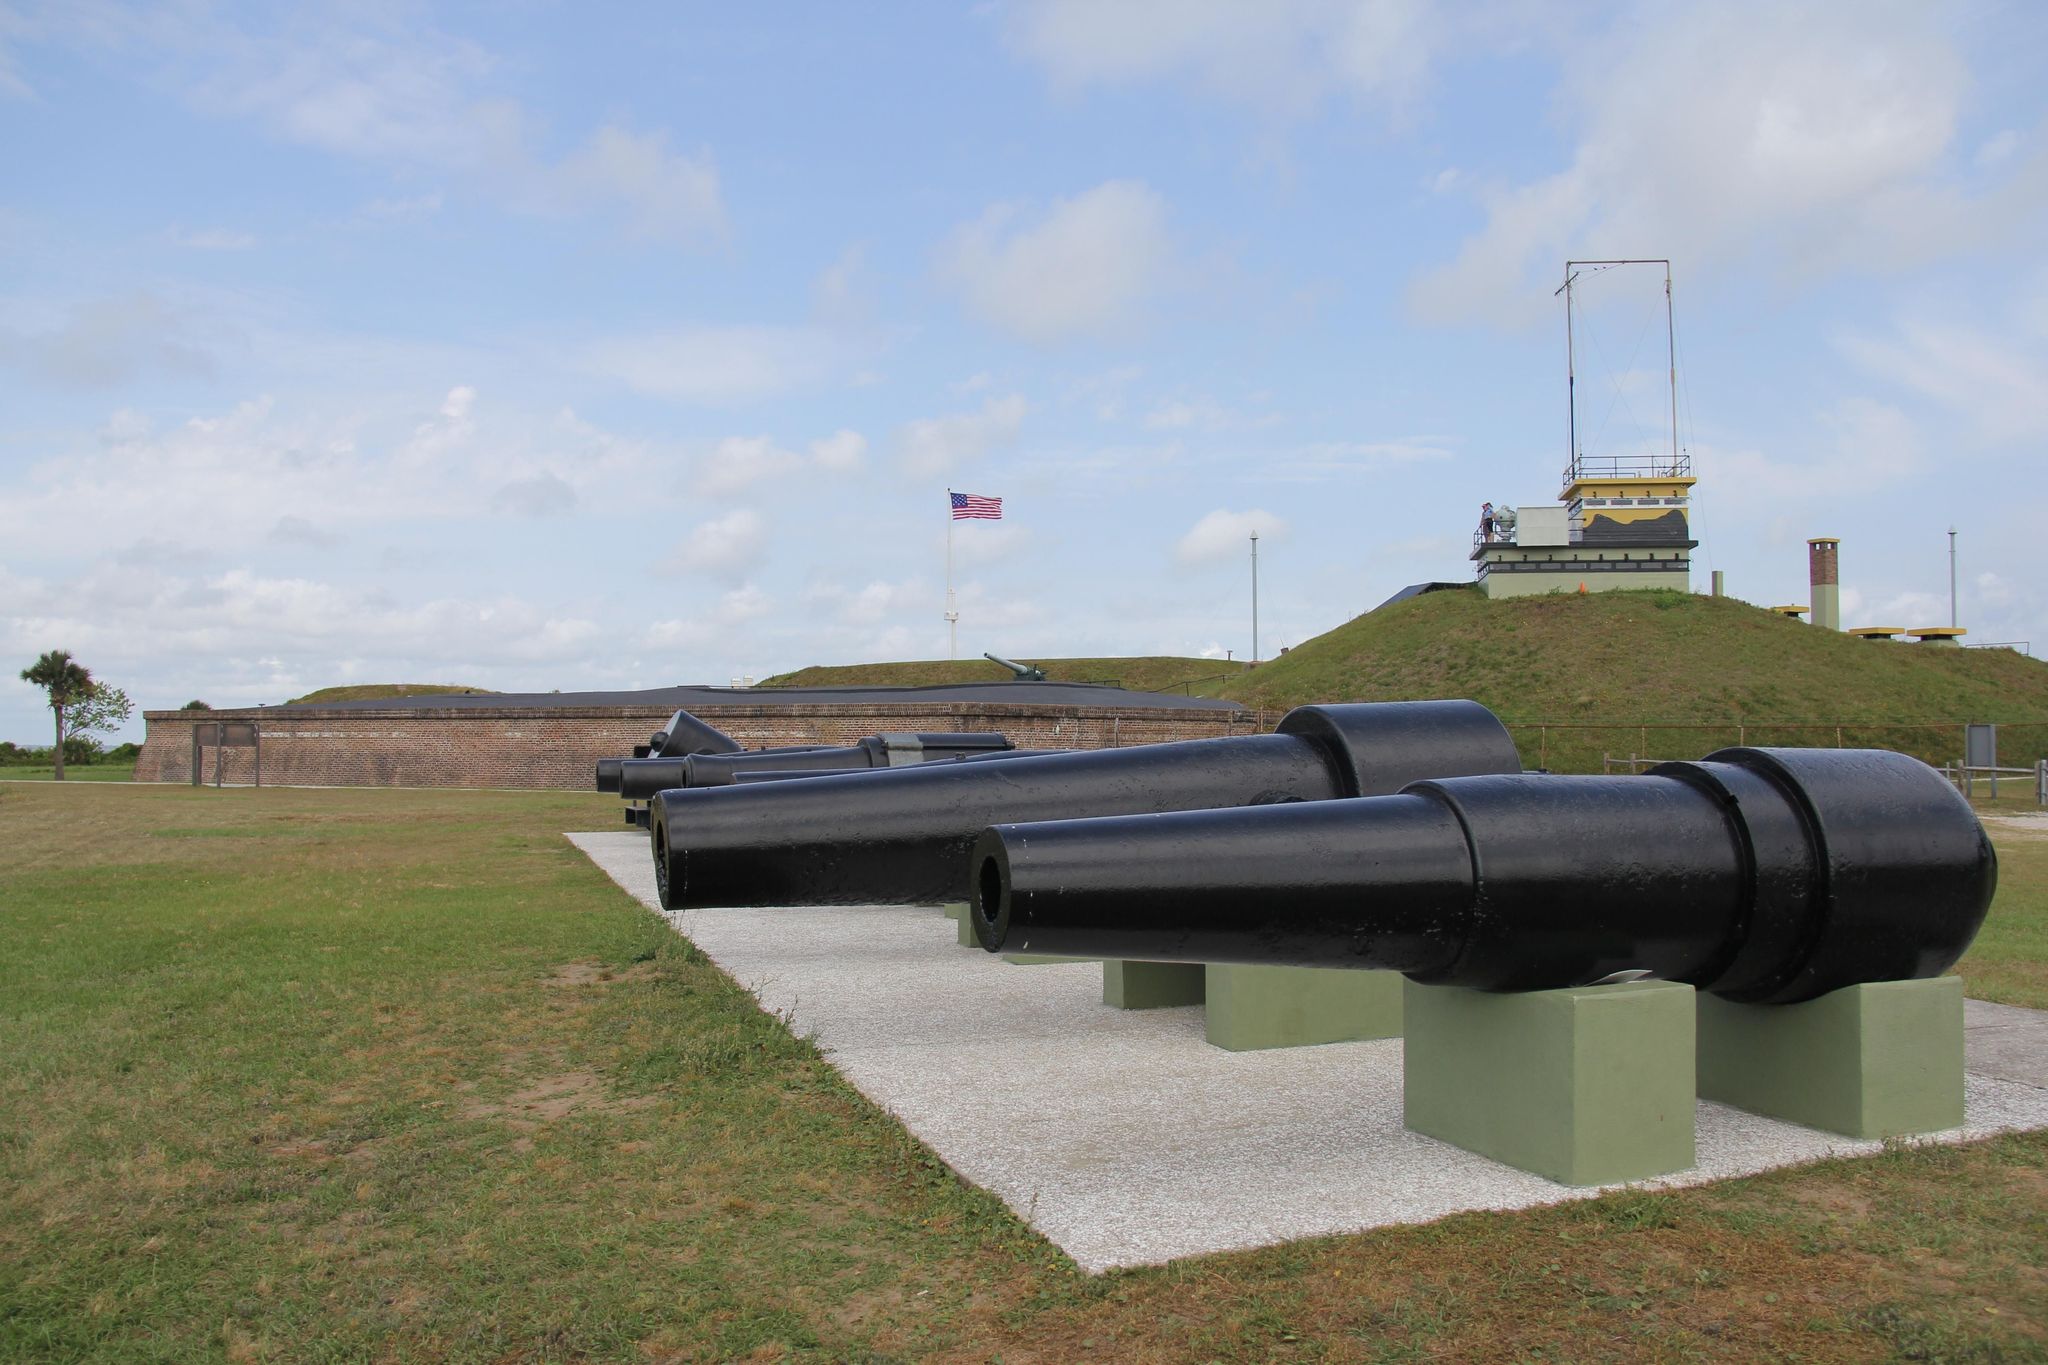 Fort Moultrie spans 171 years from 1776-1947